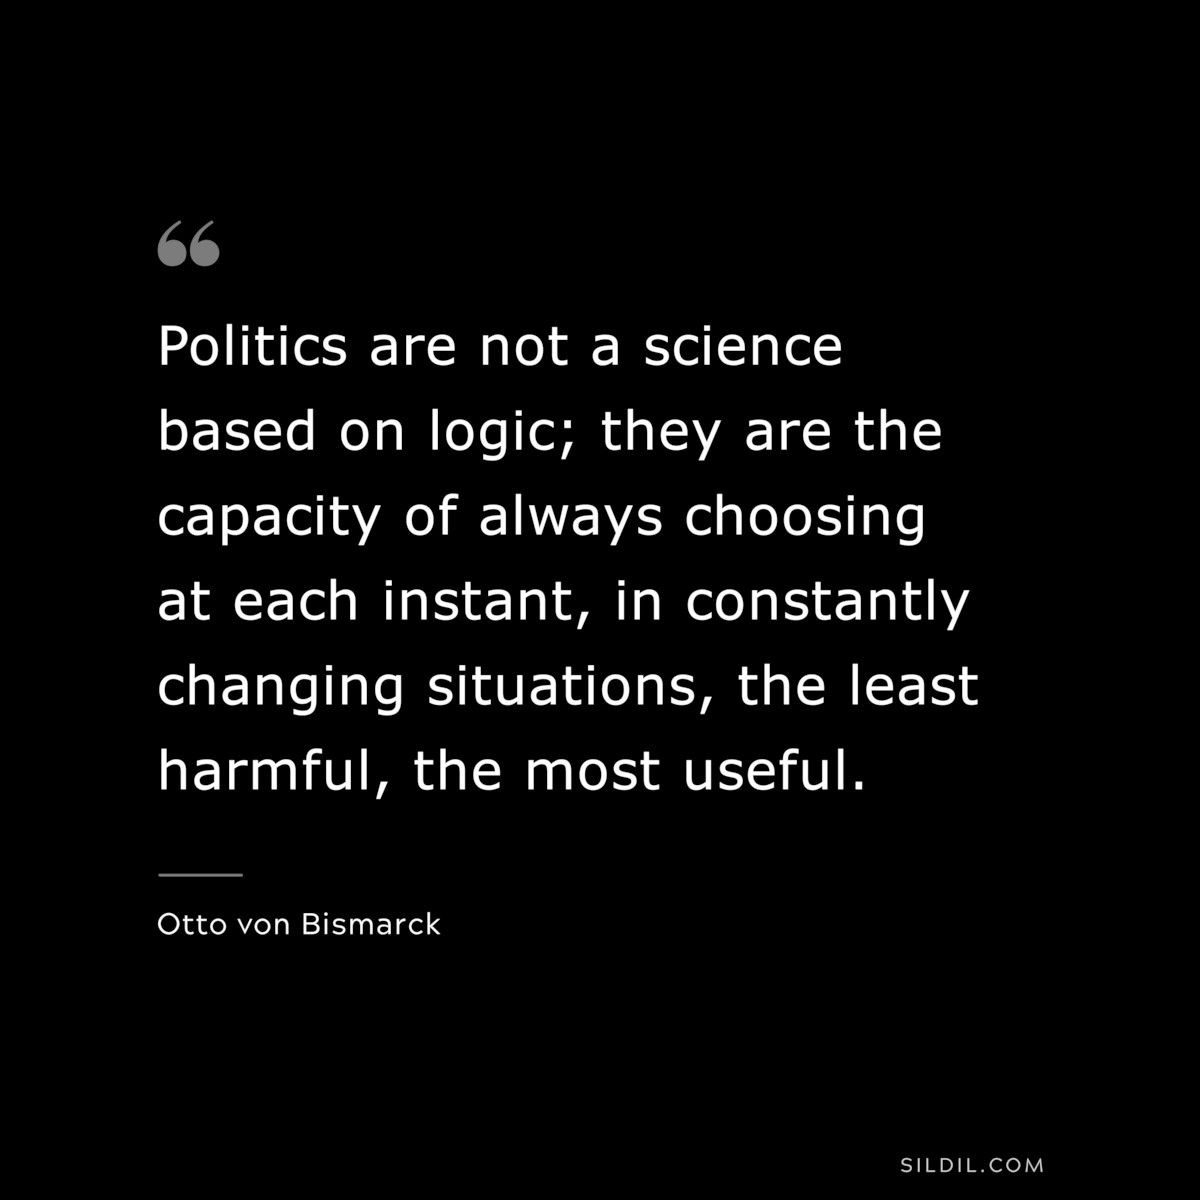 Politics are not a science based on logic; they are the capacity of always choosing at each instant, in constantly changing situations, the least harmful, the most useful. ― Otto von Bismarck